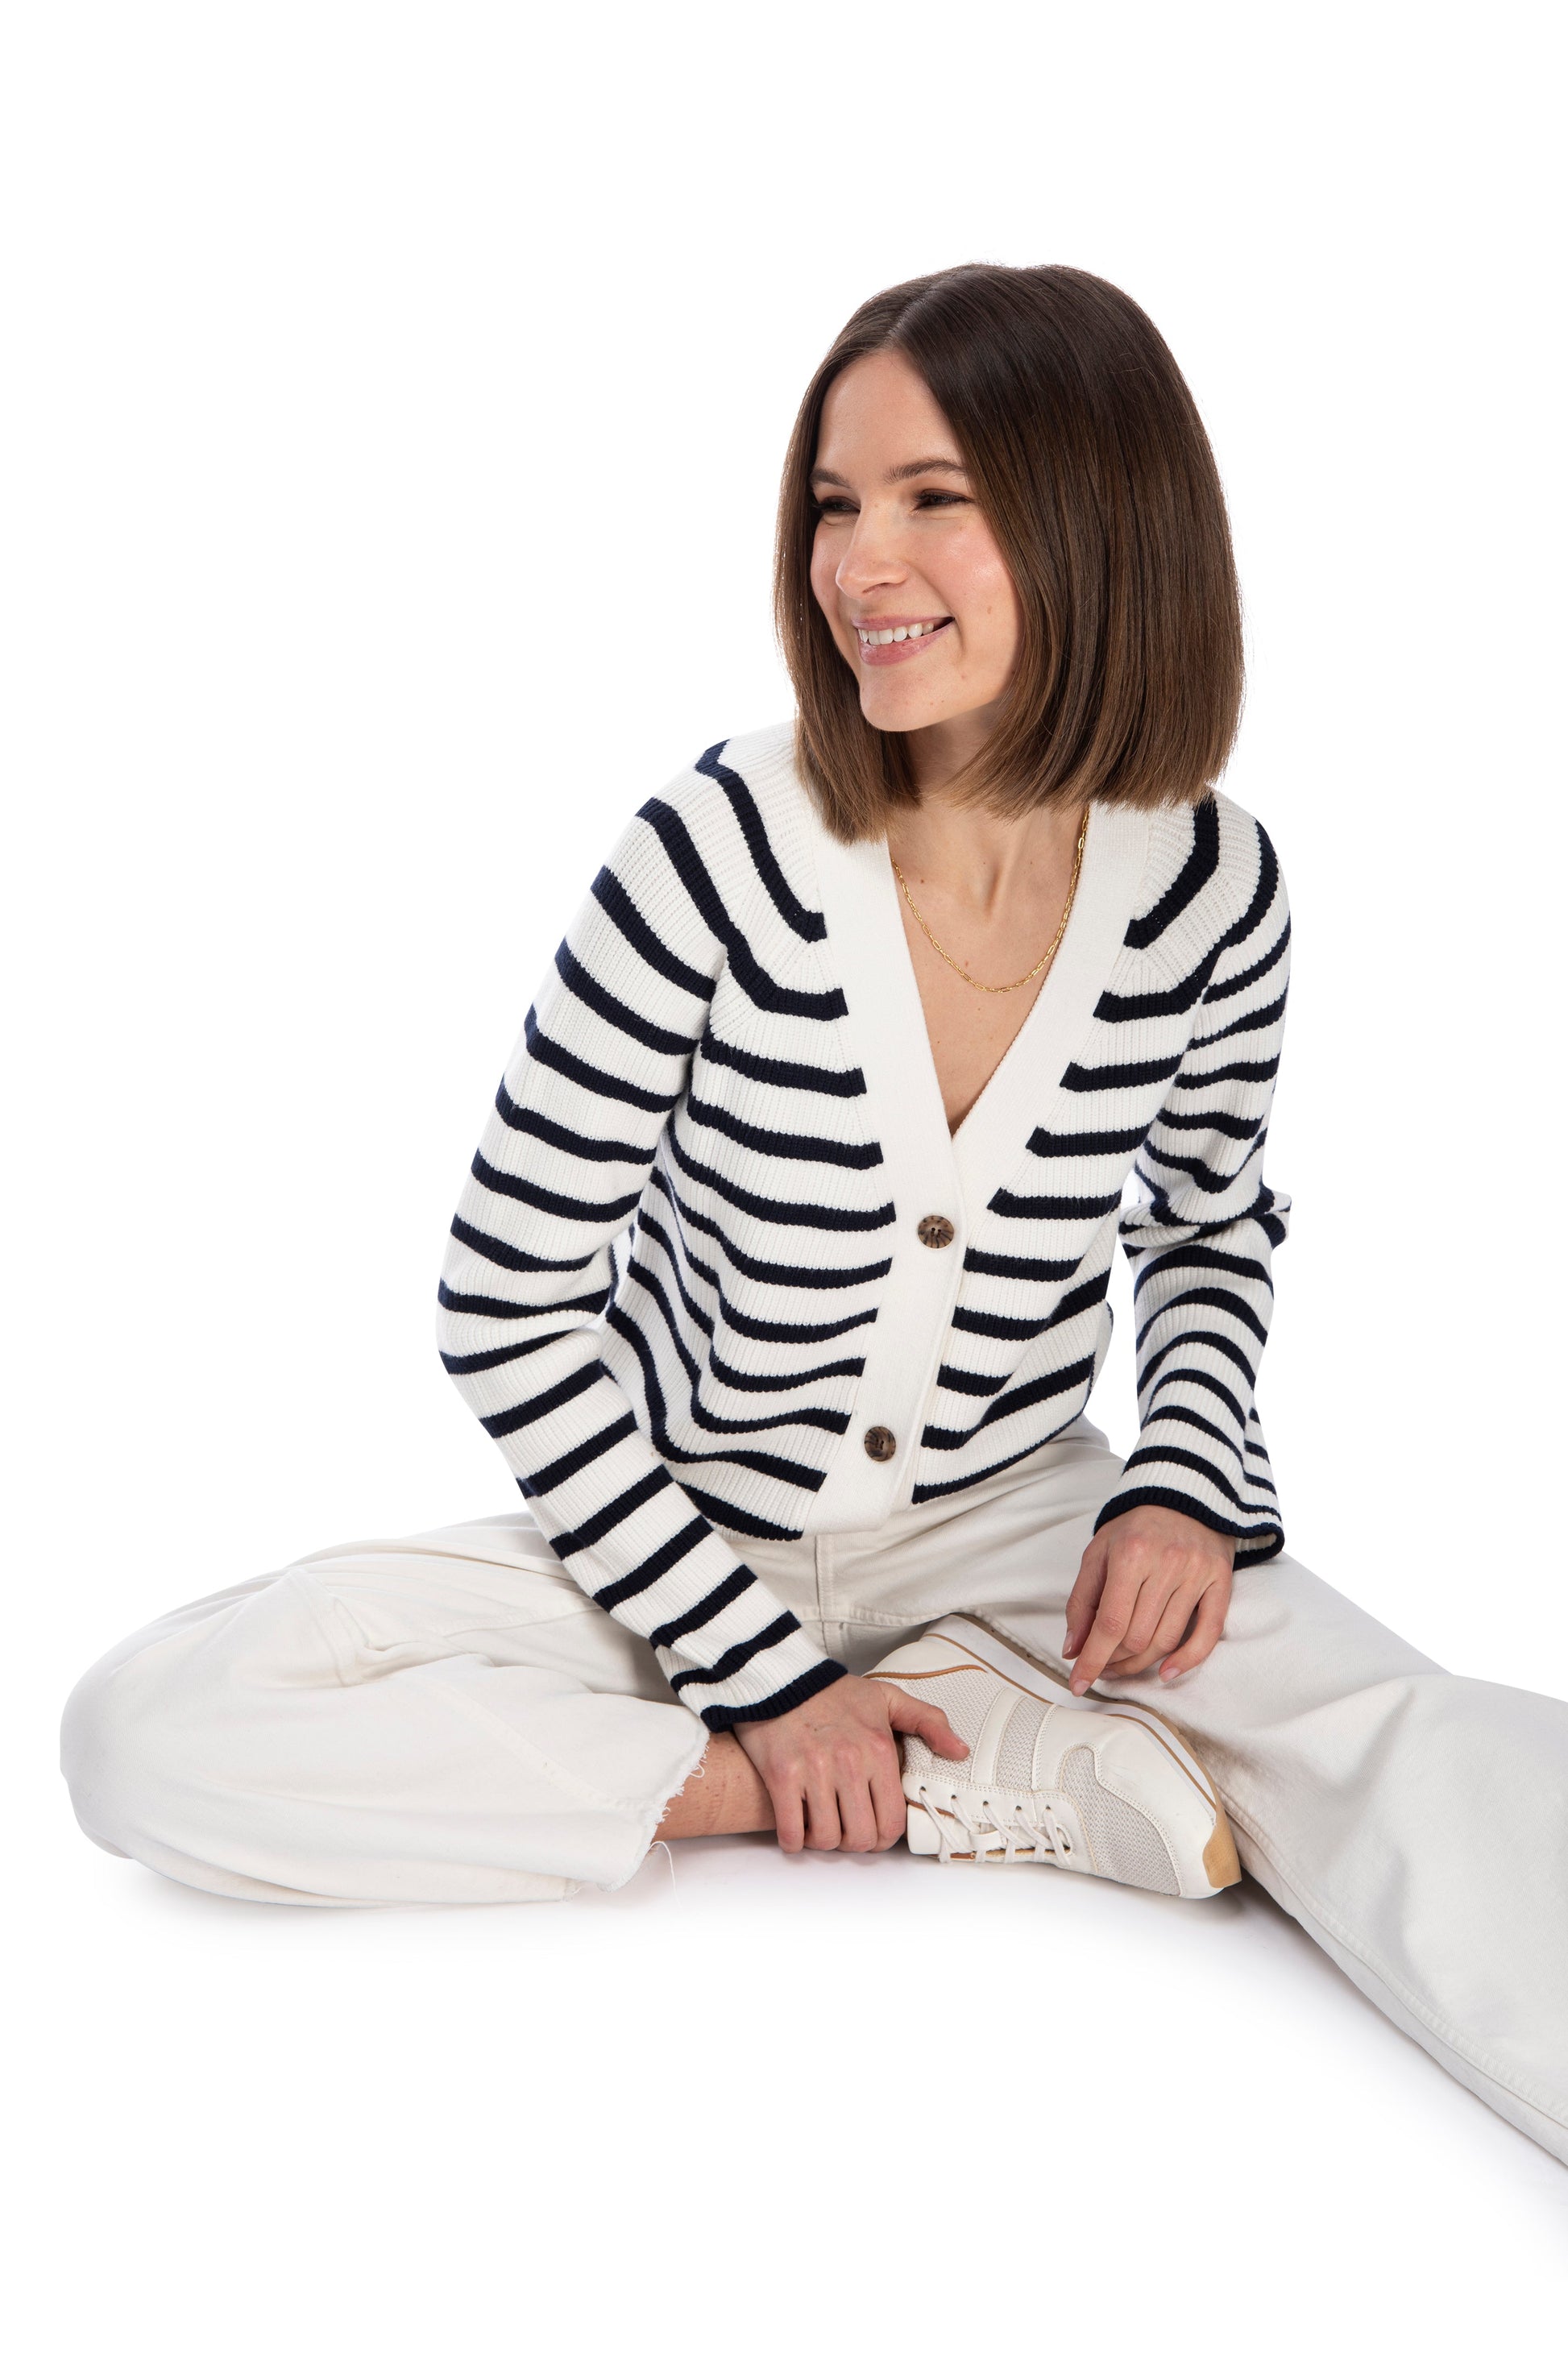 A woman with a joyful expression sitting cross-legged, wearing a B Collection by Bobeau LS STRIPE CARDIGAN made from super soft yarn, white pants, and sneakers, isolated on a white background.